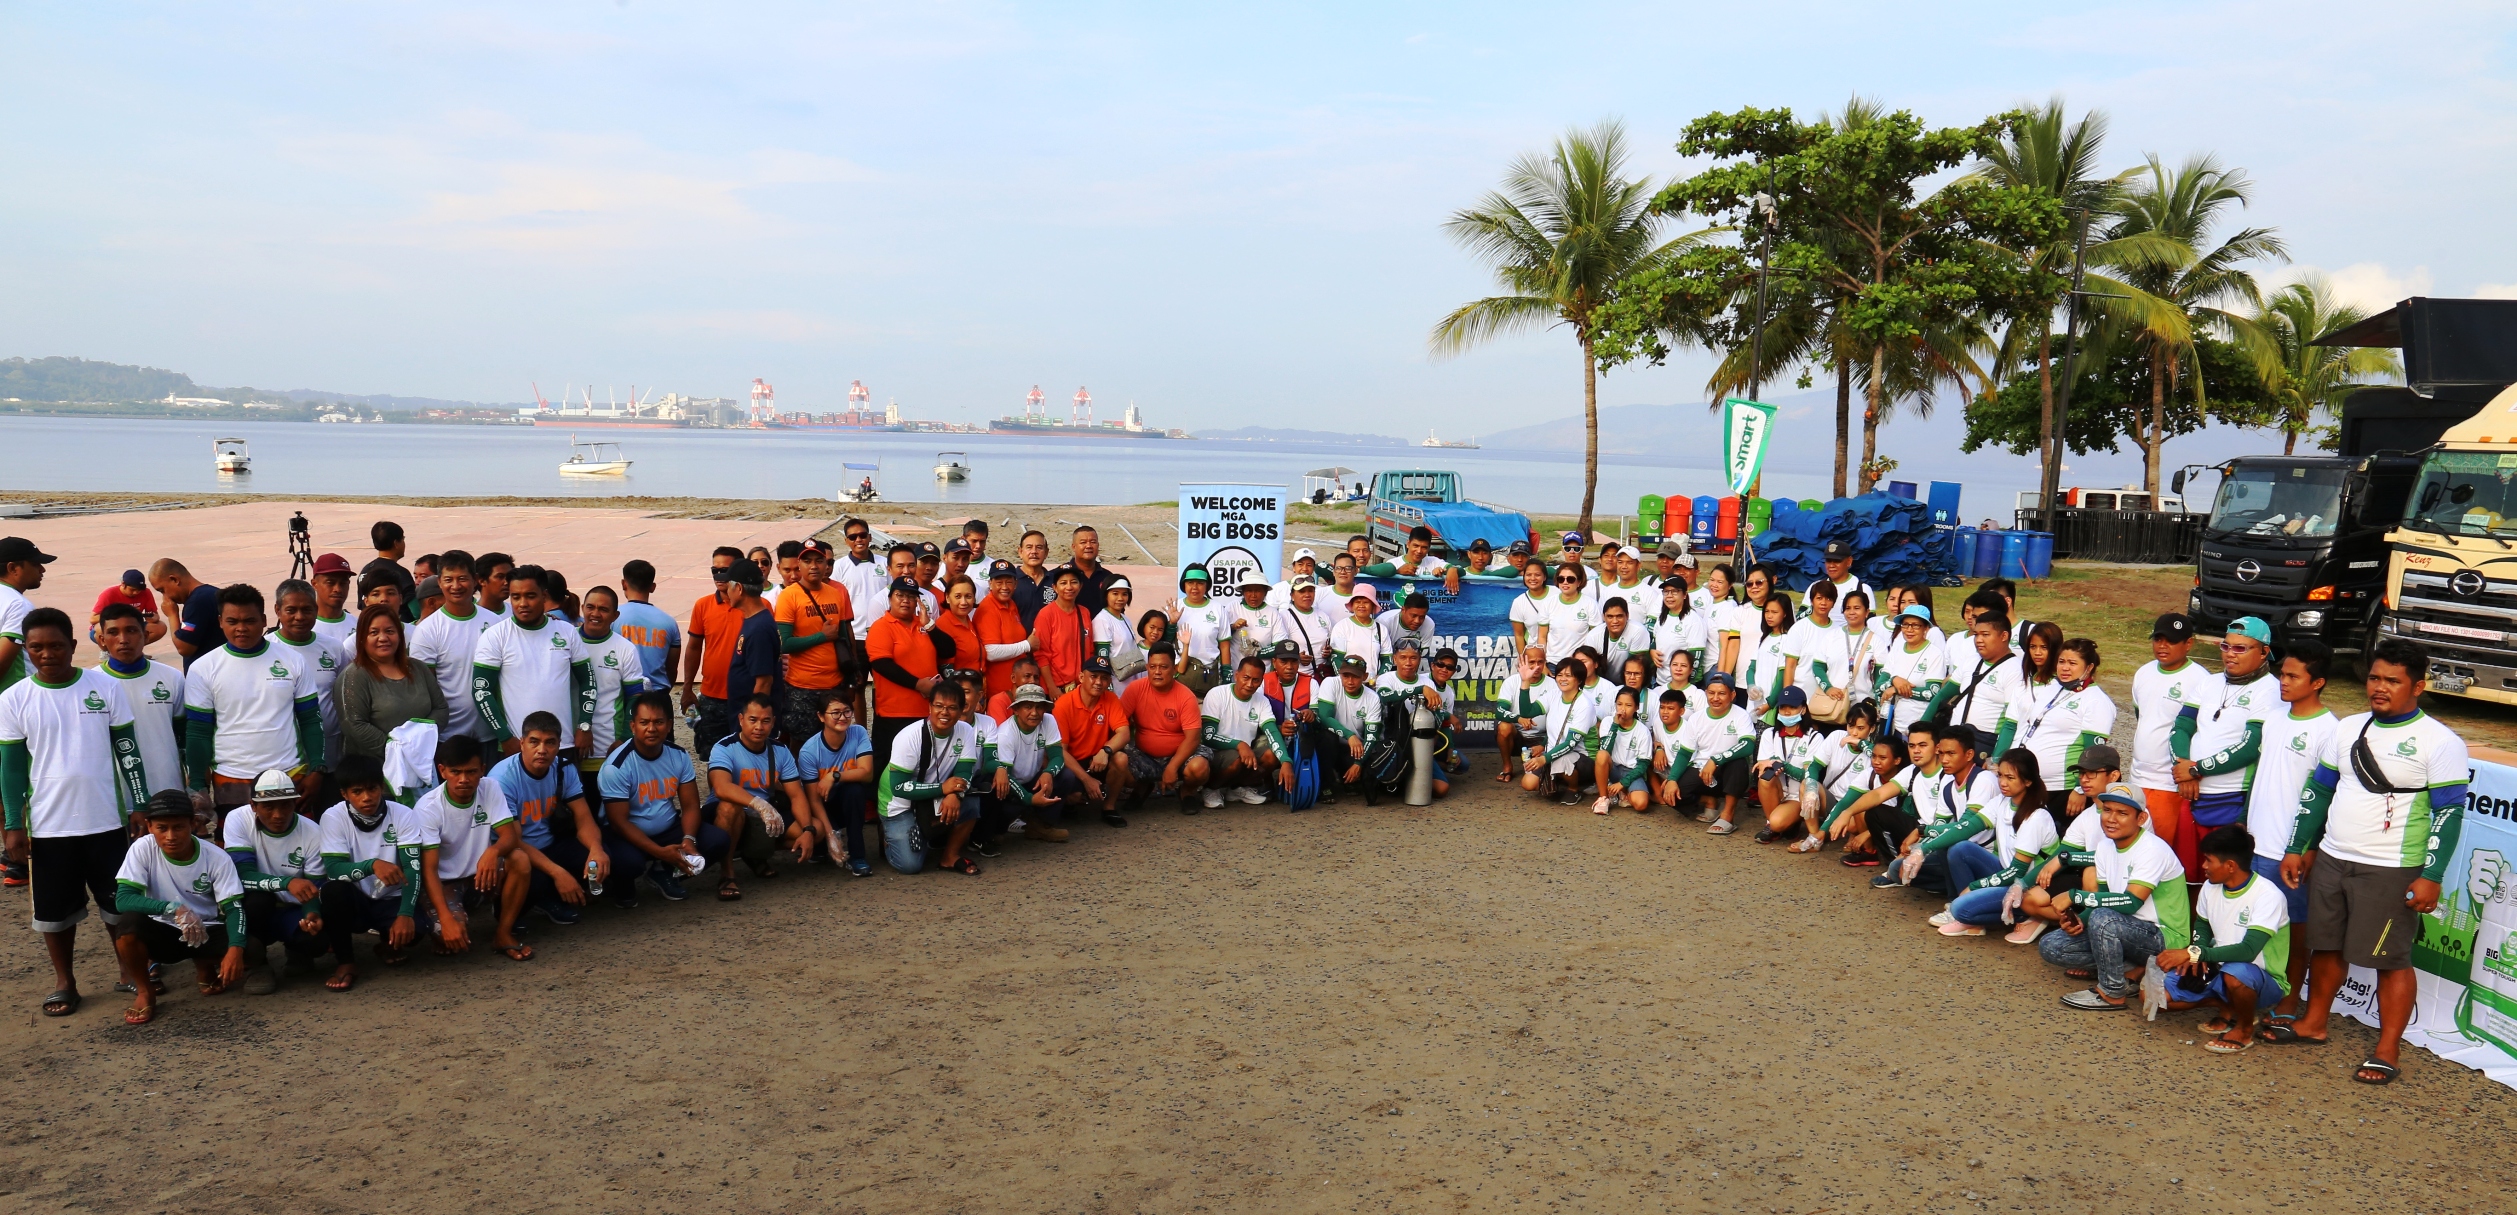 Various stakeholder groups participate in the clean-up along the Boardwalk Park in the Subic Bay Freeport in preparation for the Ironman 70.3 triathlon on June 2.